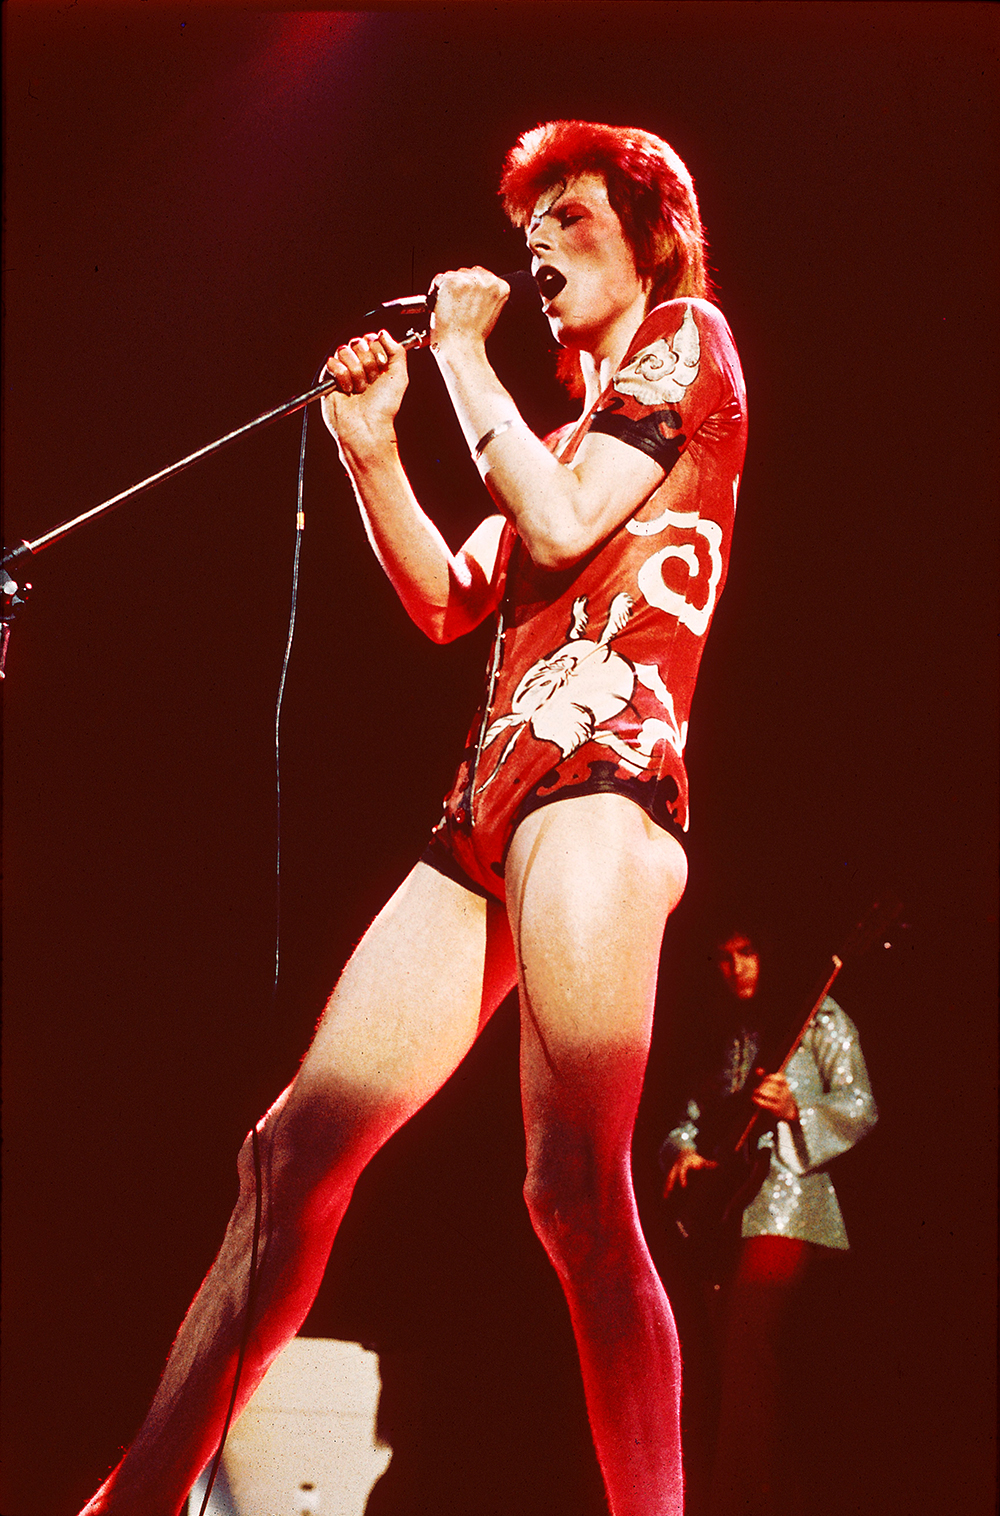 Performing as Ziggy Stardust at the Hammersmith Odeon in London in 1973.